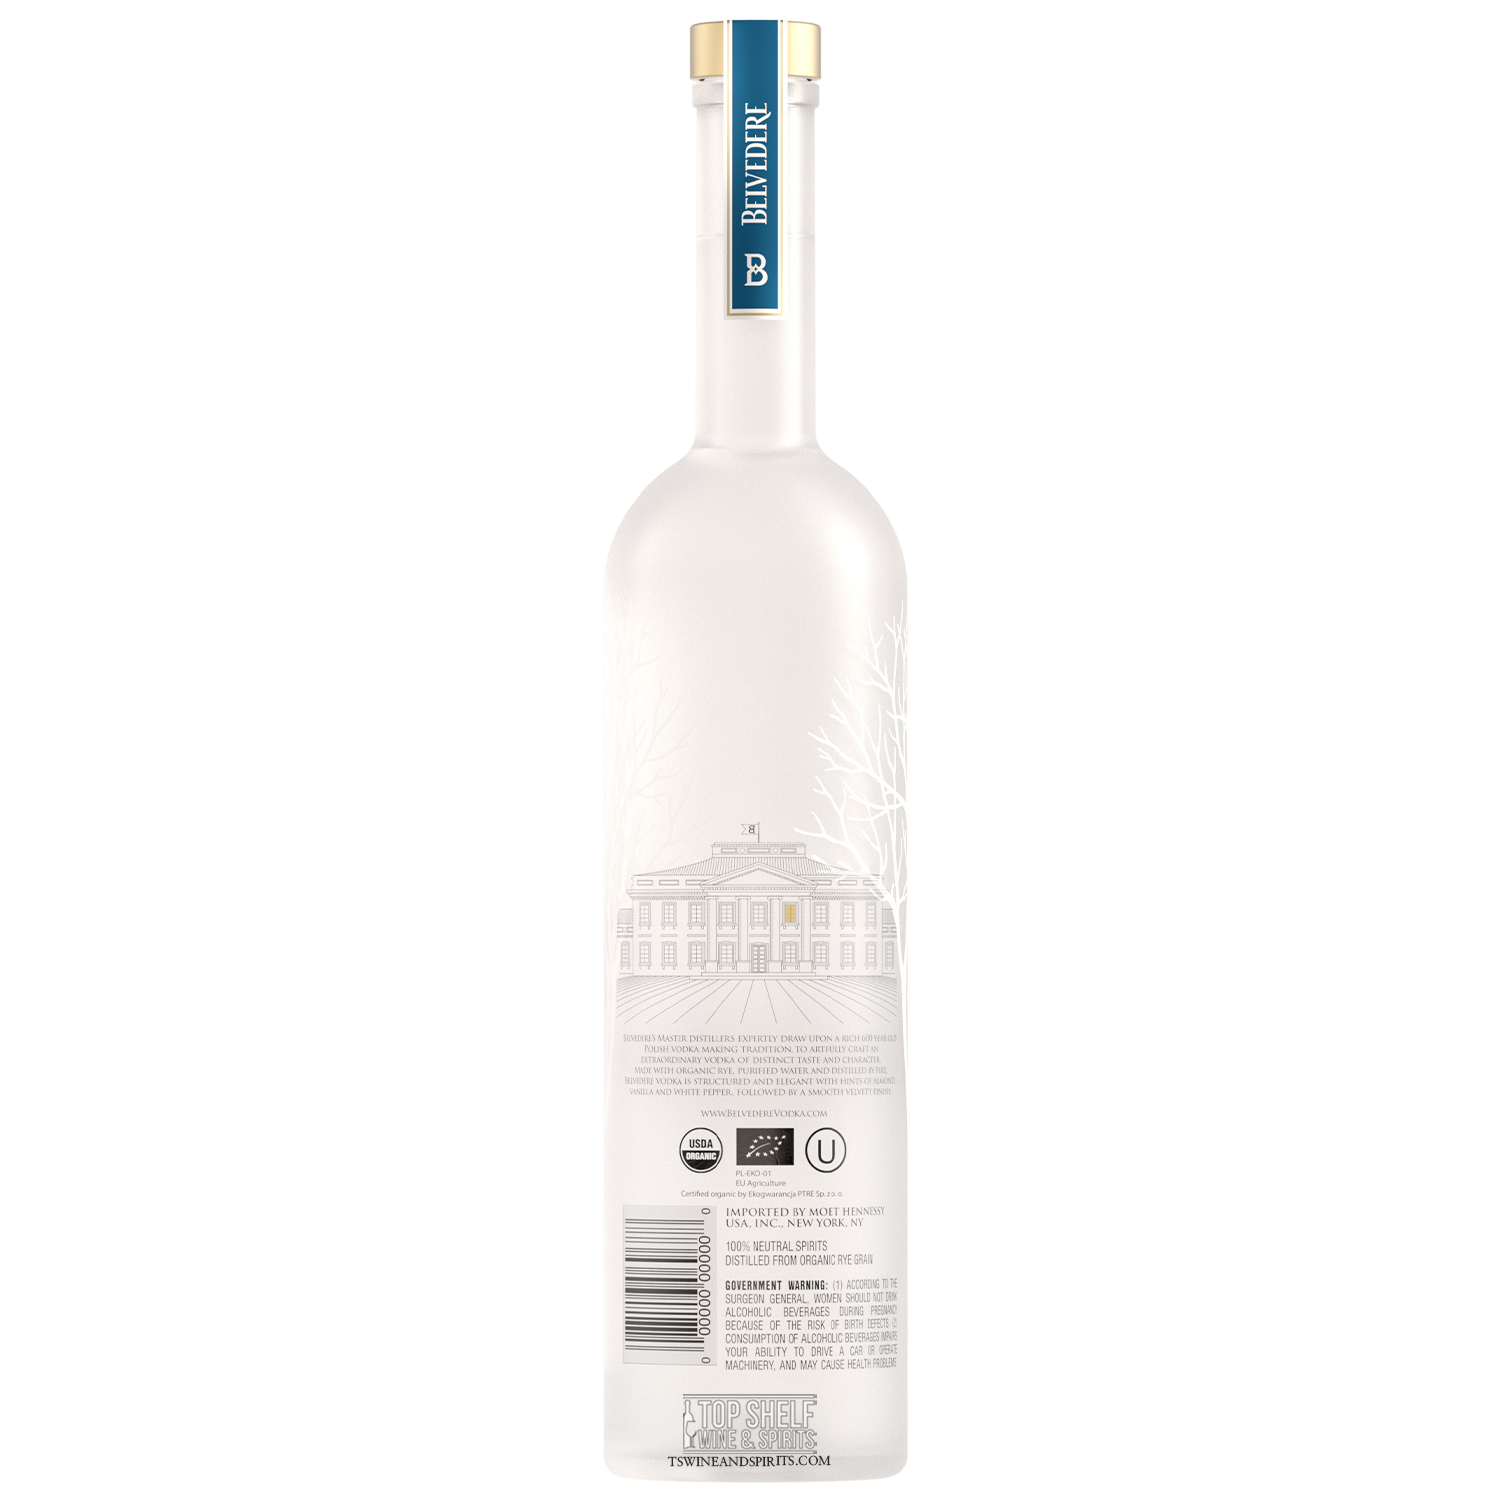 & Gifting Available) Delivery (Engraving Organic Vodka| Belvedere